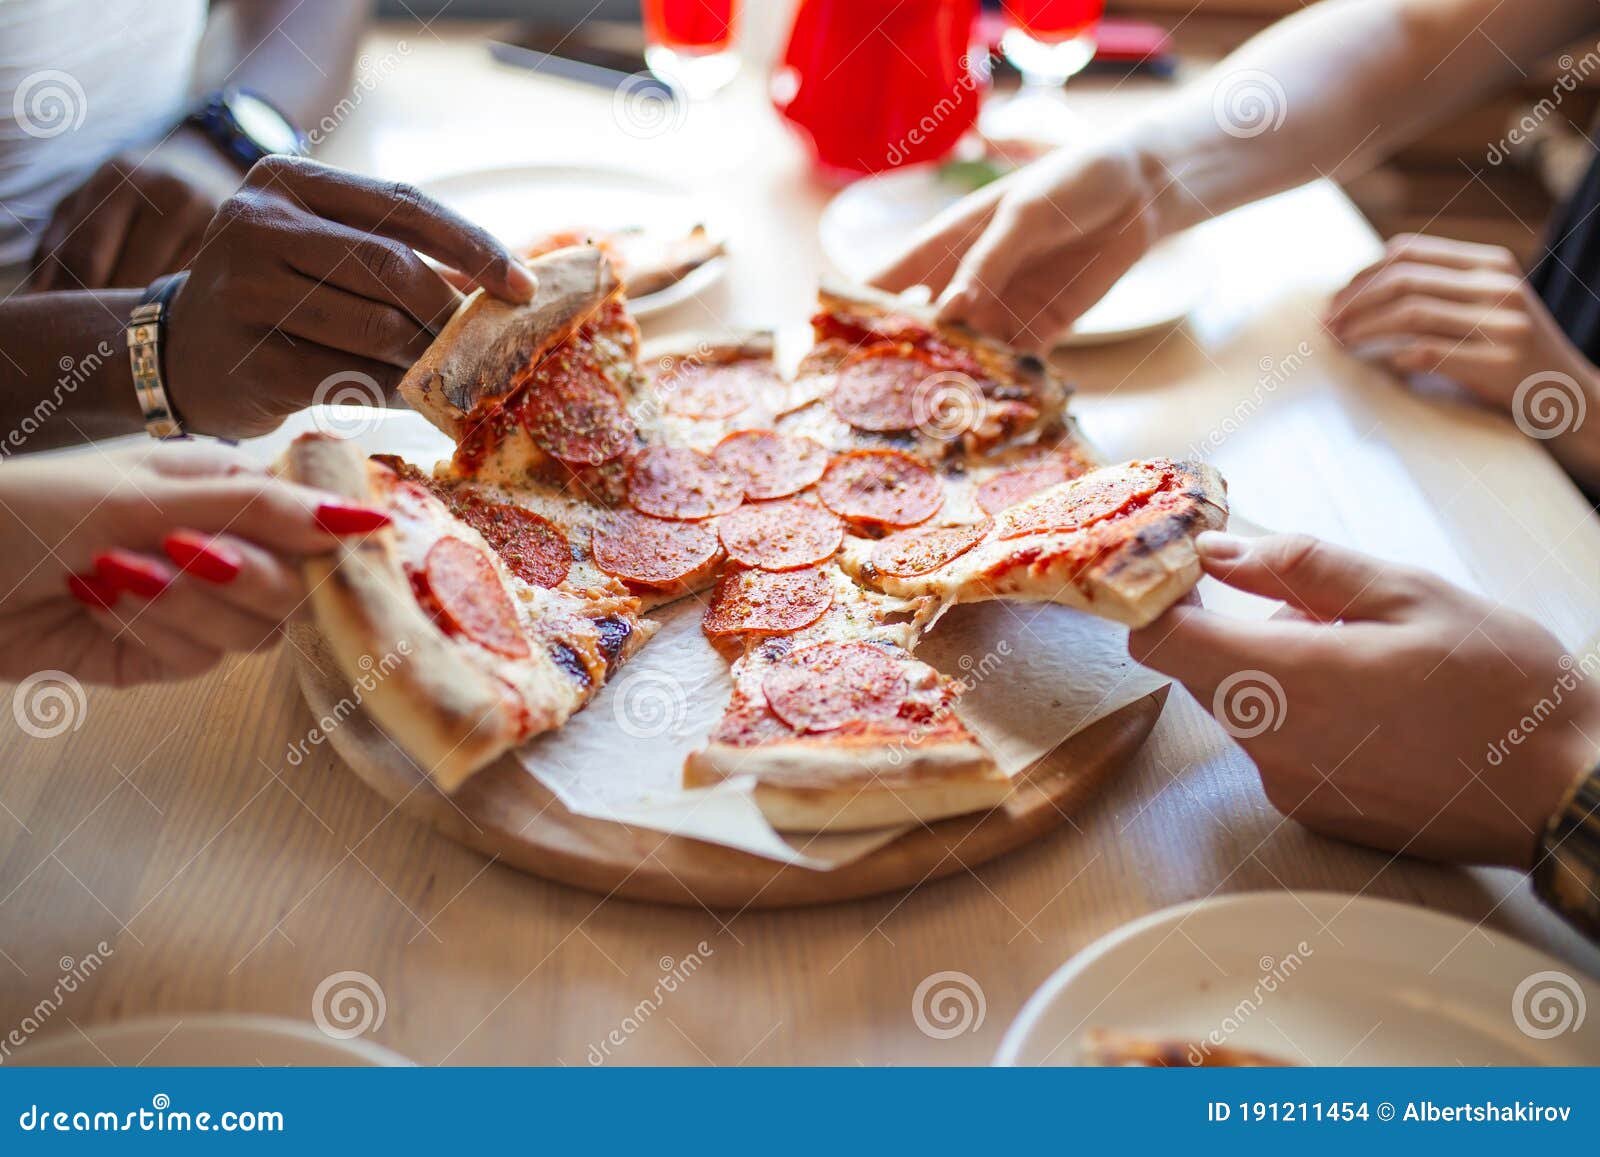 Close Up Of People Hands Taking Slices Of Pepperoni Pizza In Cafe Top